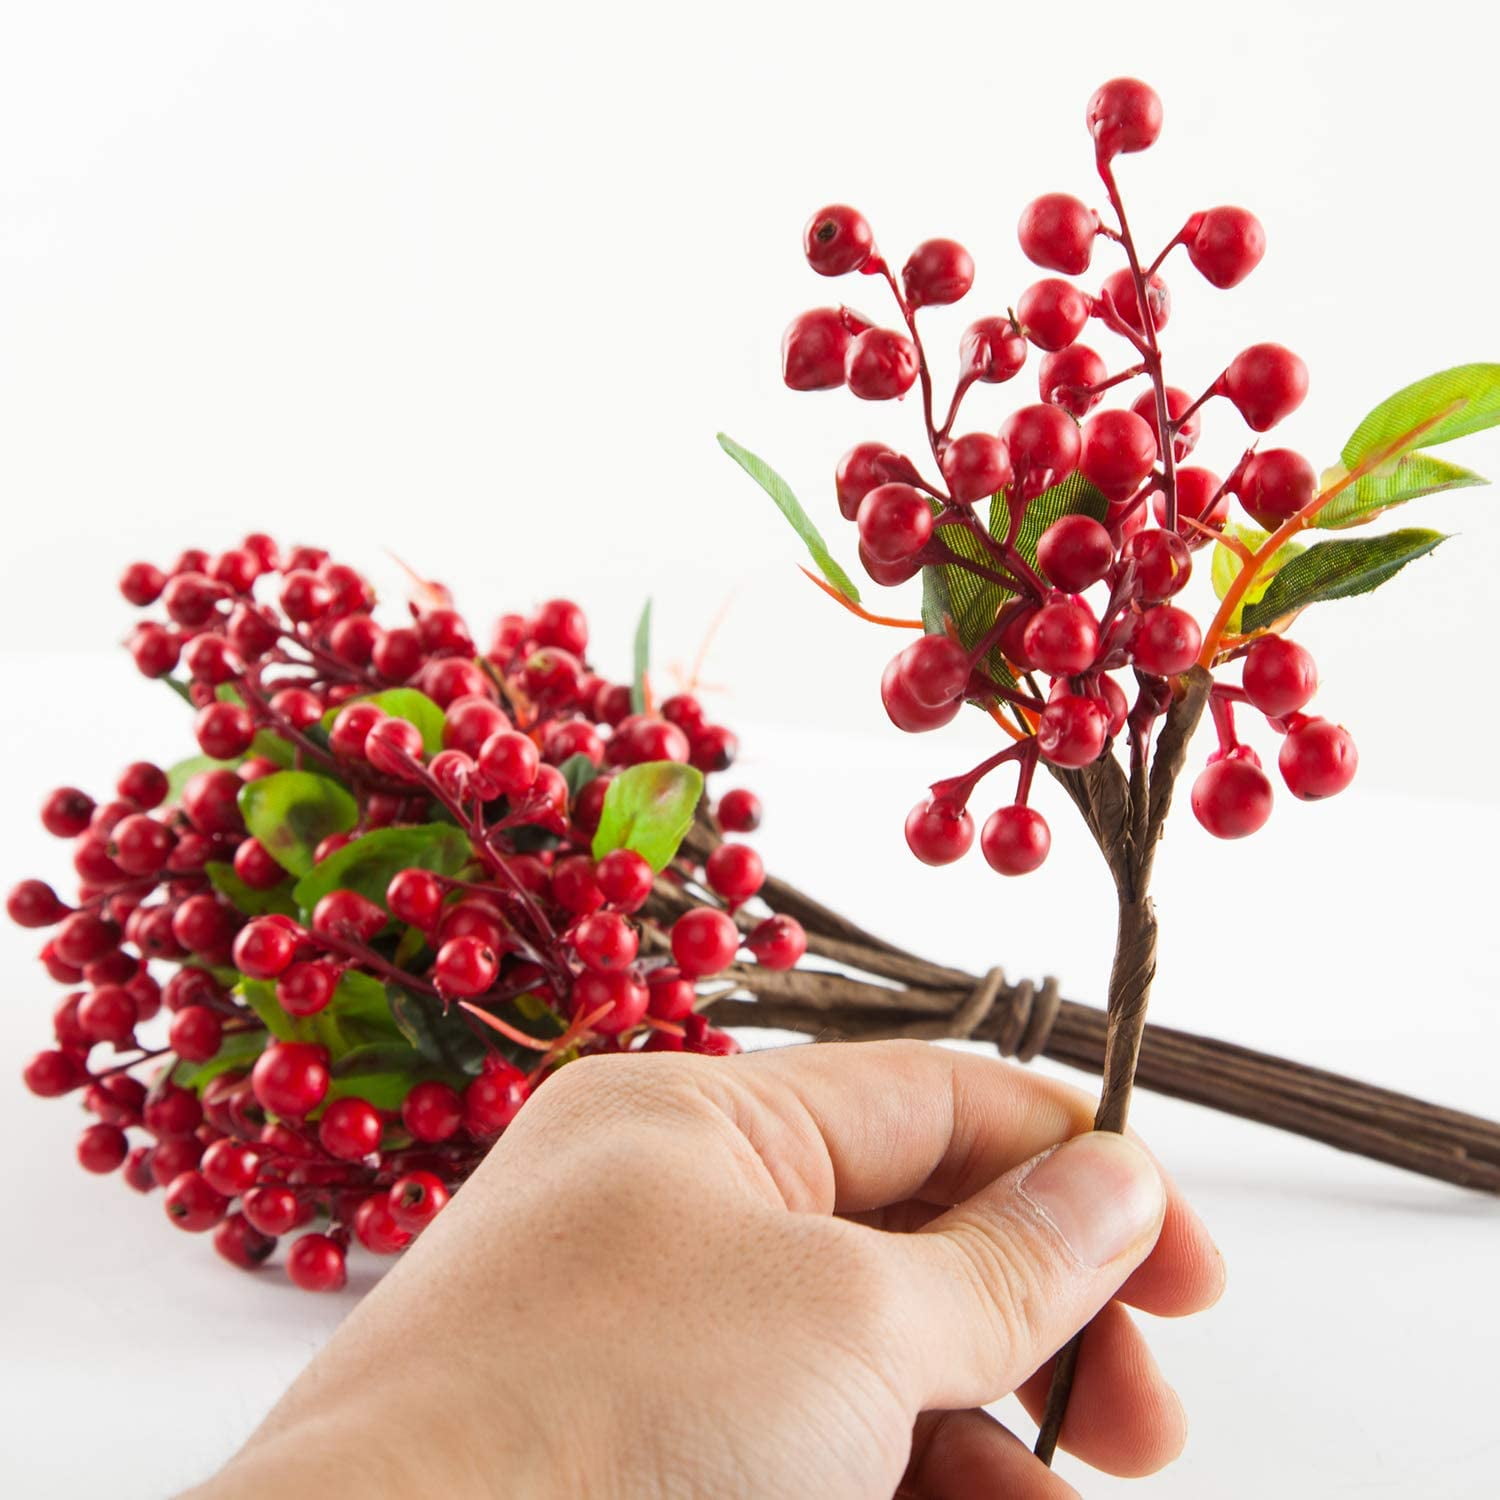 IDOXE Artificial Red Holly Berry Stem Picks Decorative Ornaments Berry Picks Artificial Christmas Berry Spray Iced Berry Stems Red Berry Twig